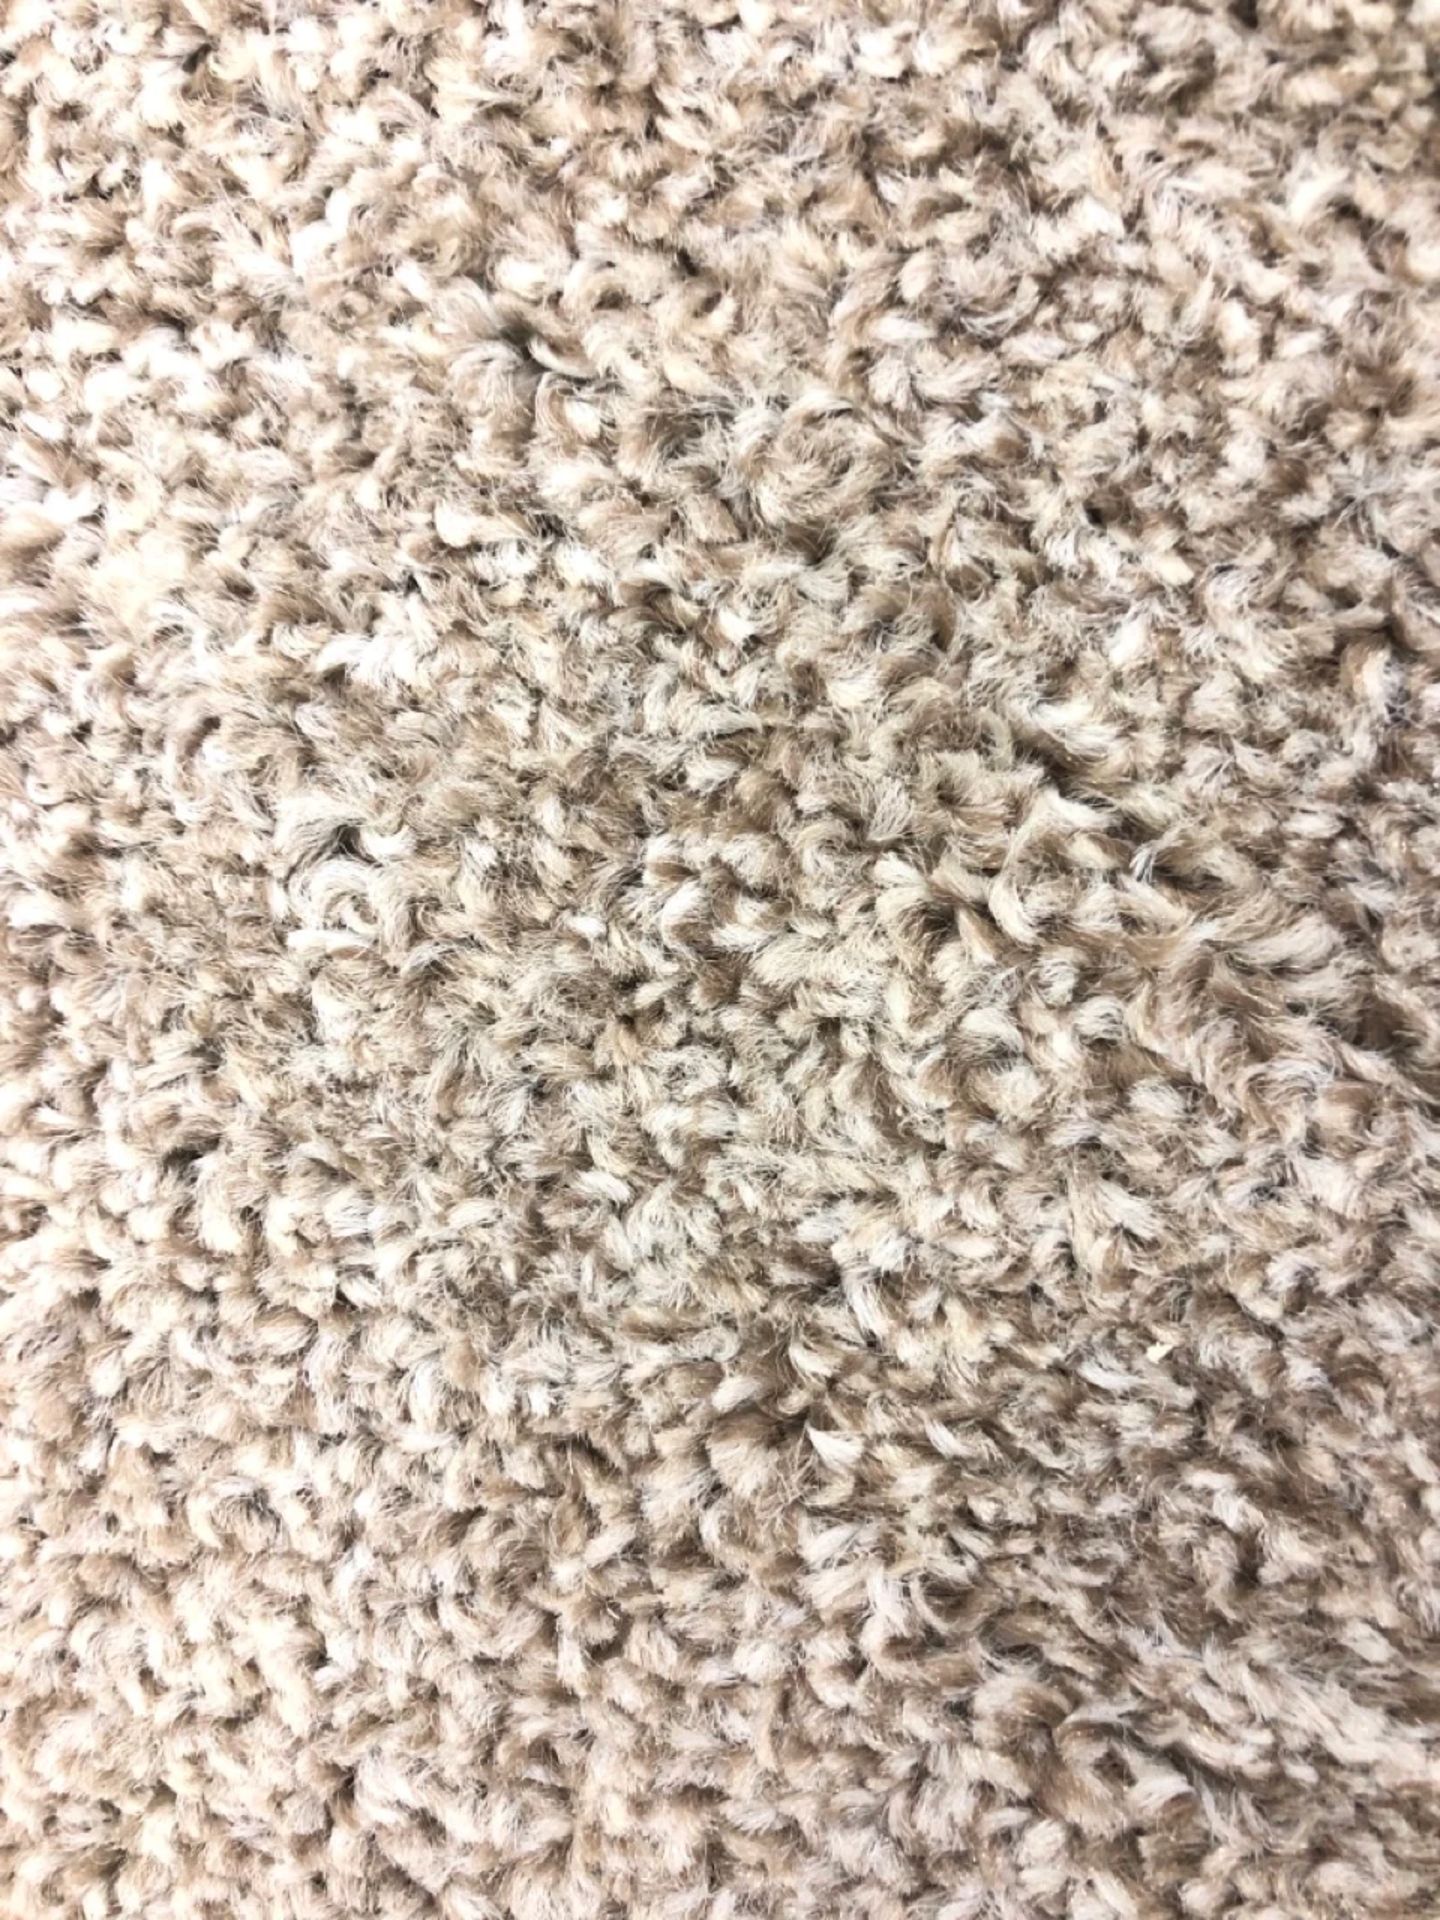 Balta Moorland Twist Carpet In Cotton Field Approx. Size 5M x 4.4M - Image 2 of 2